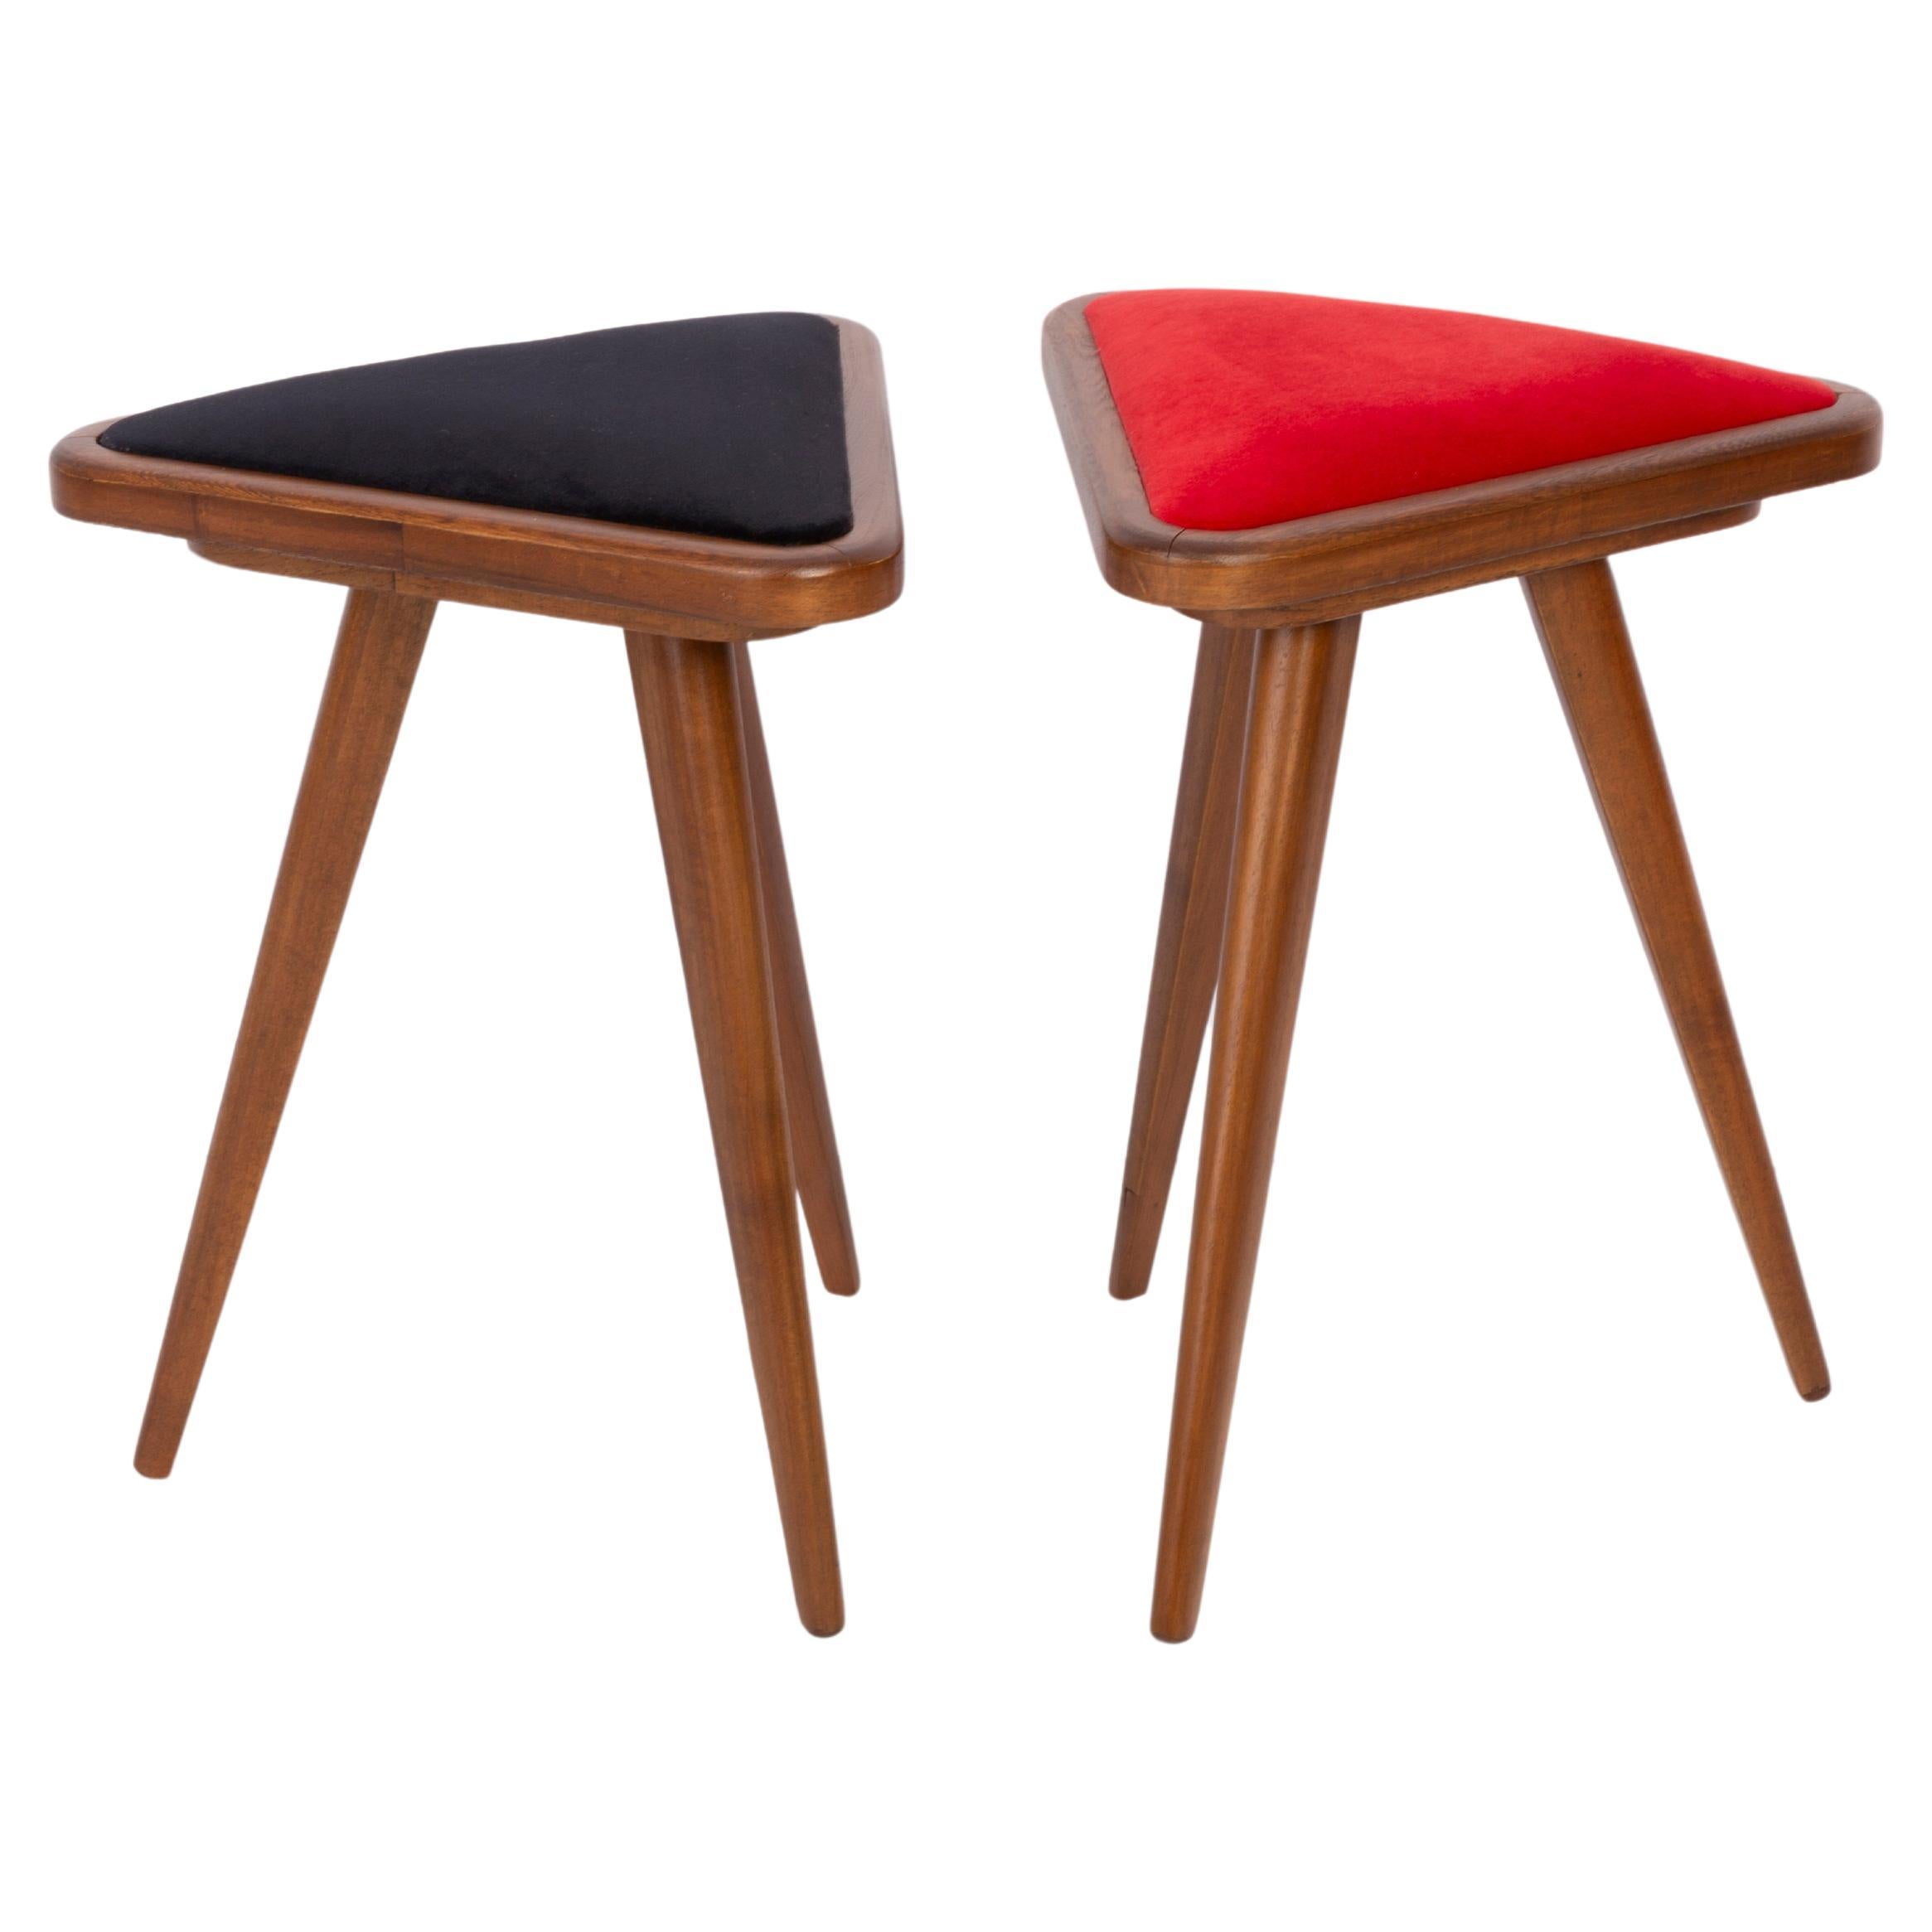 Set of Two Black and Red Velvet 20th Century Triangle Stools, 1960s For Sale